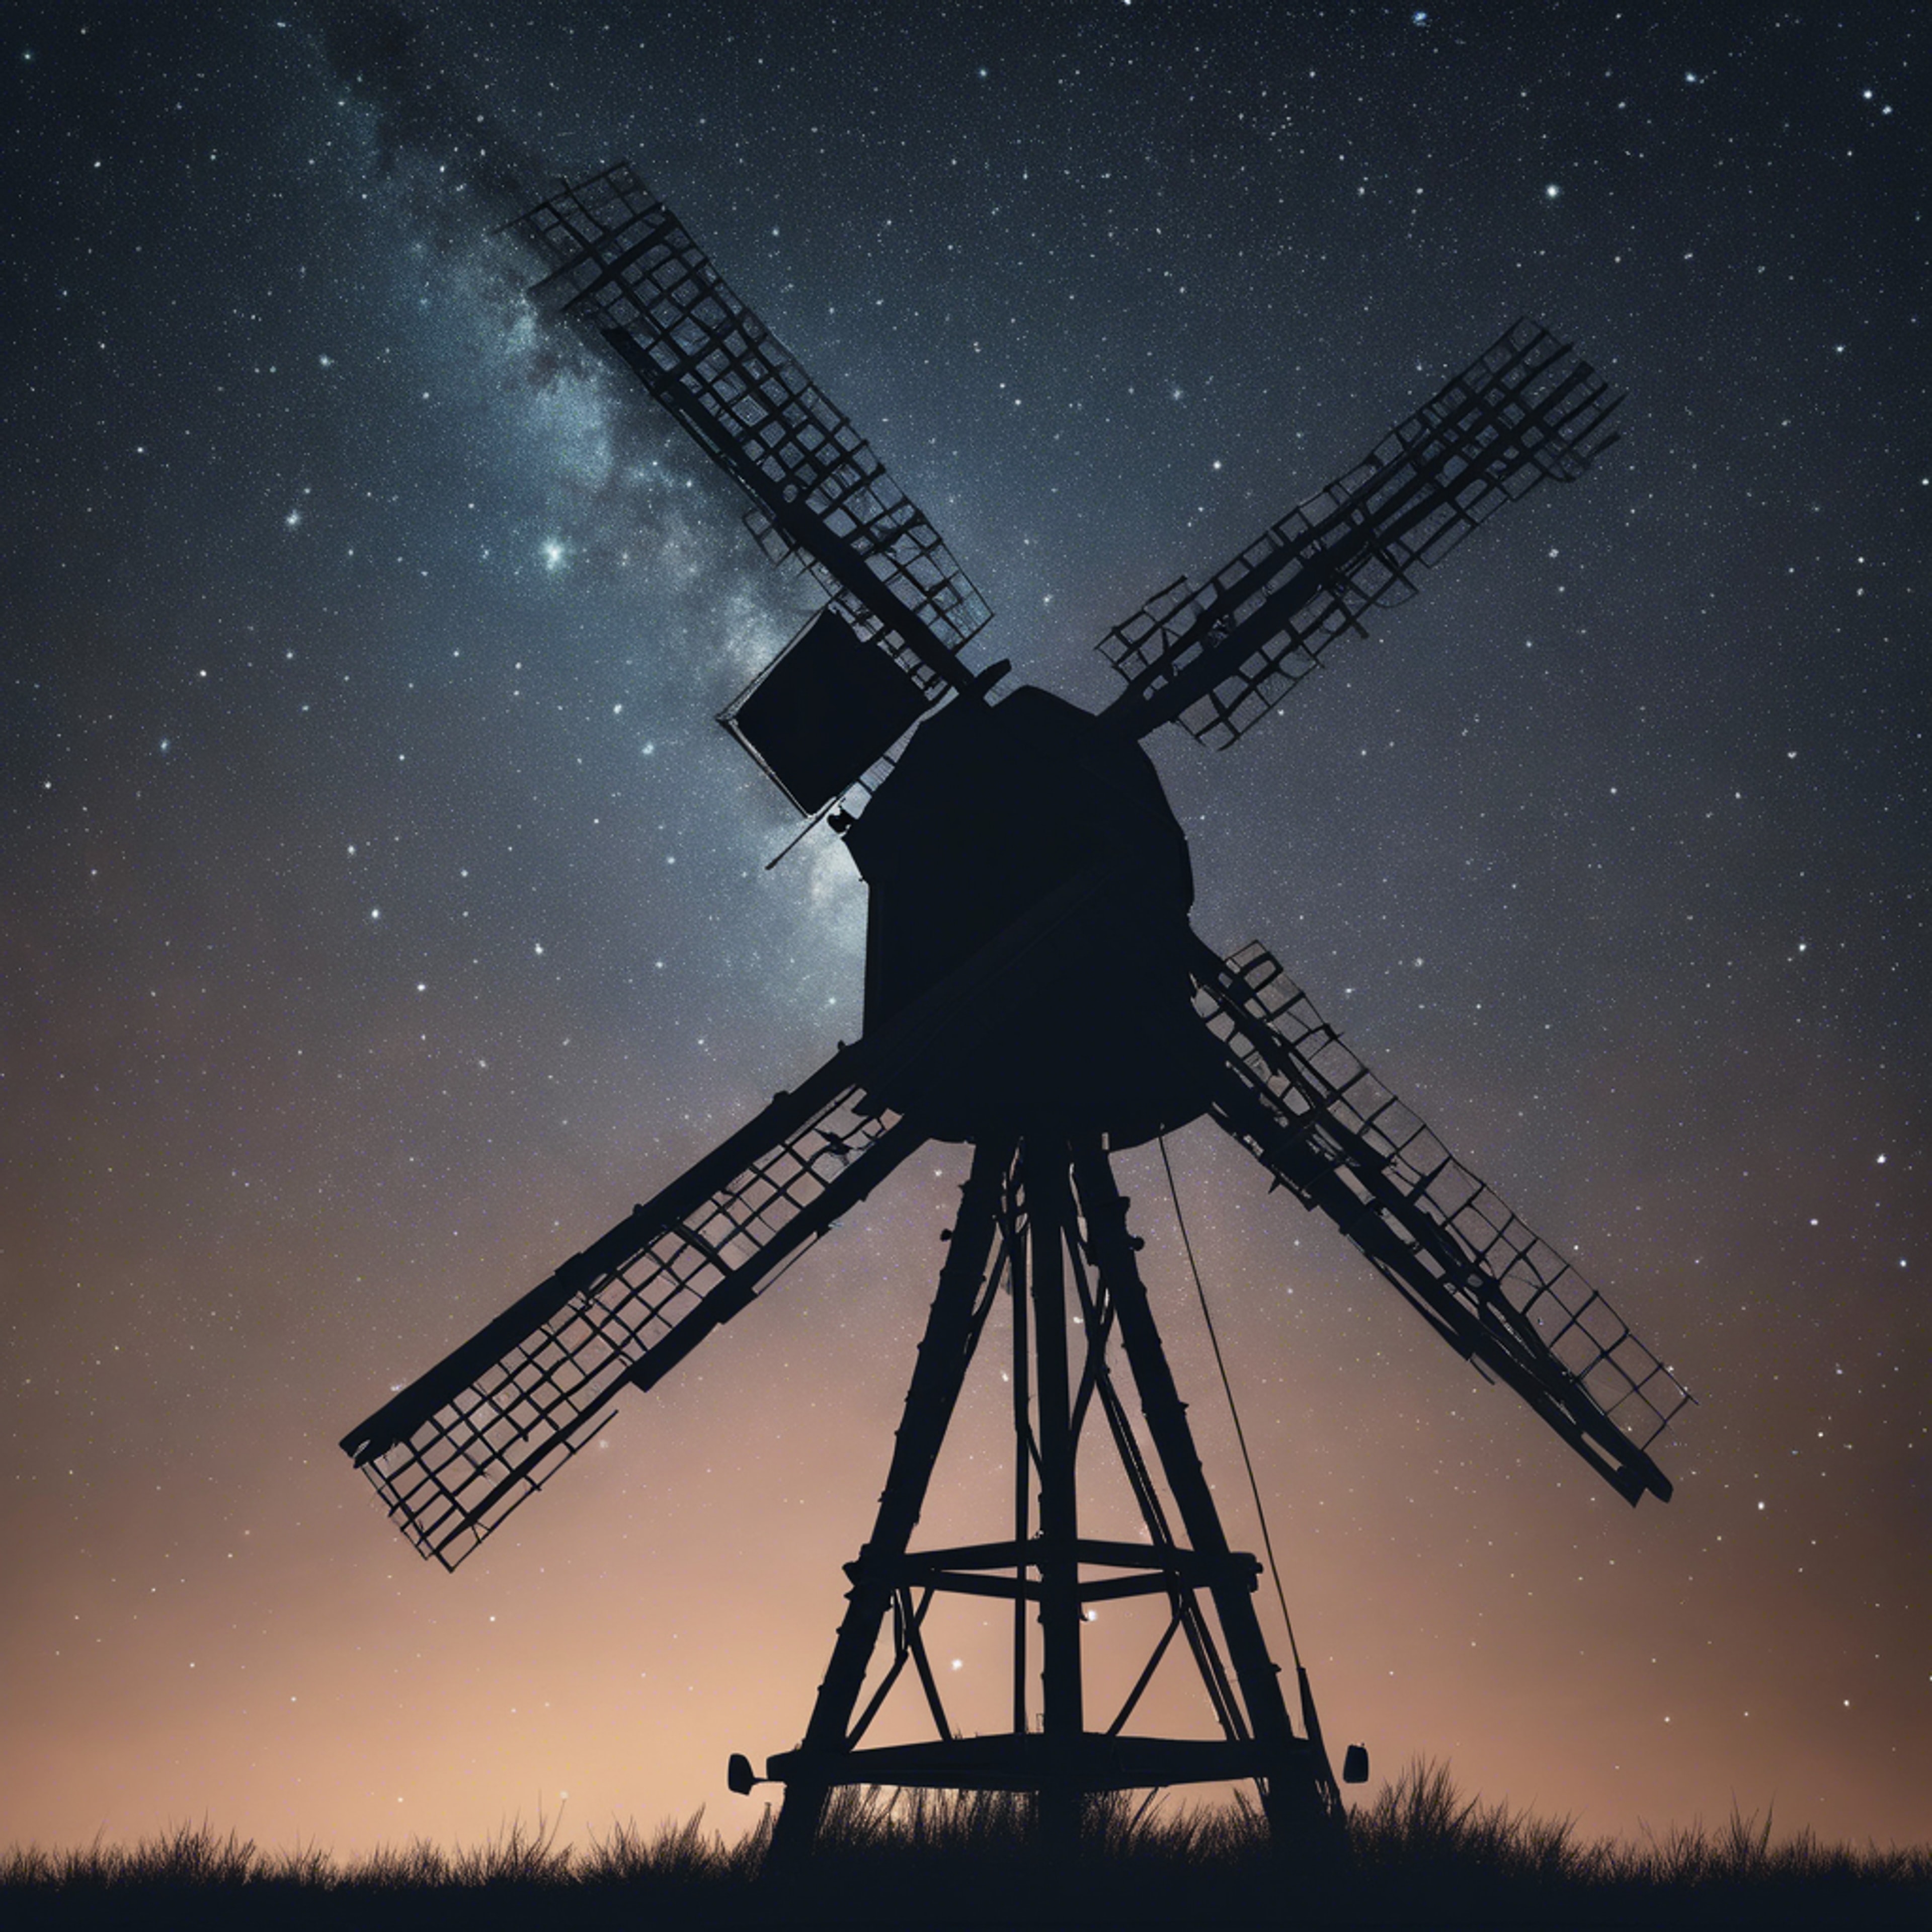 A silhouette of a traditional windmill against a mesmerizing starry night sky. Tapeta[d821762278f94928b618]